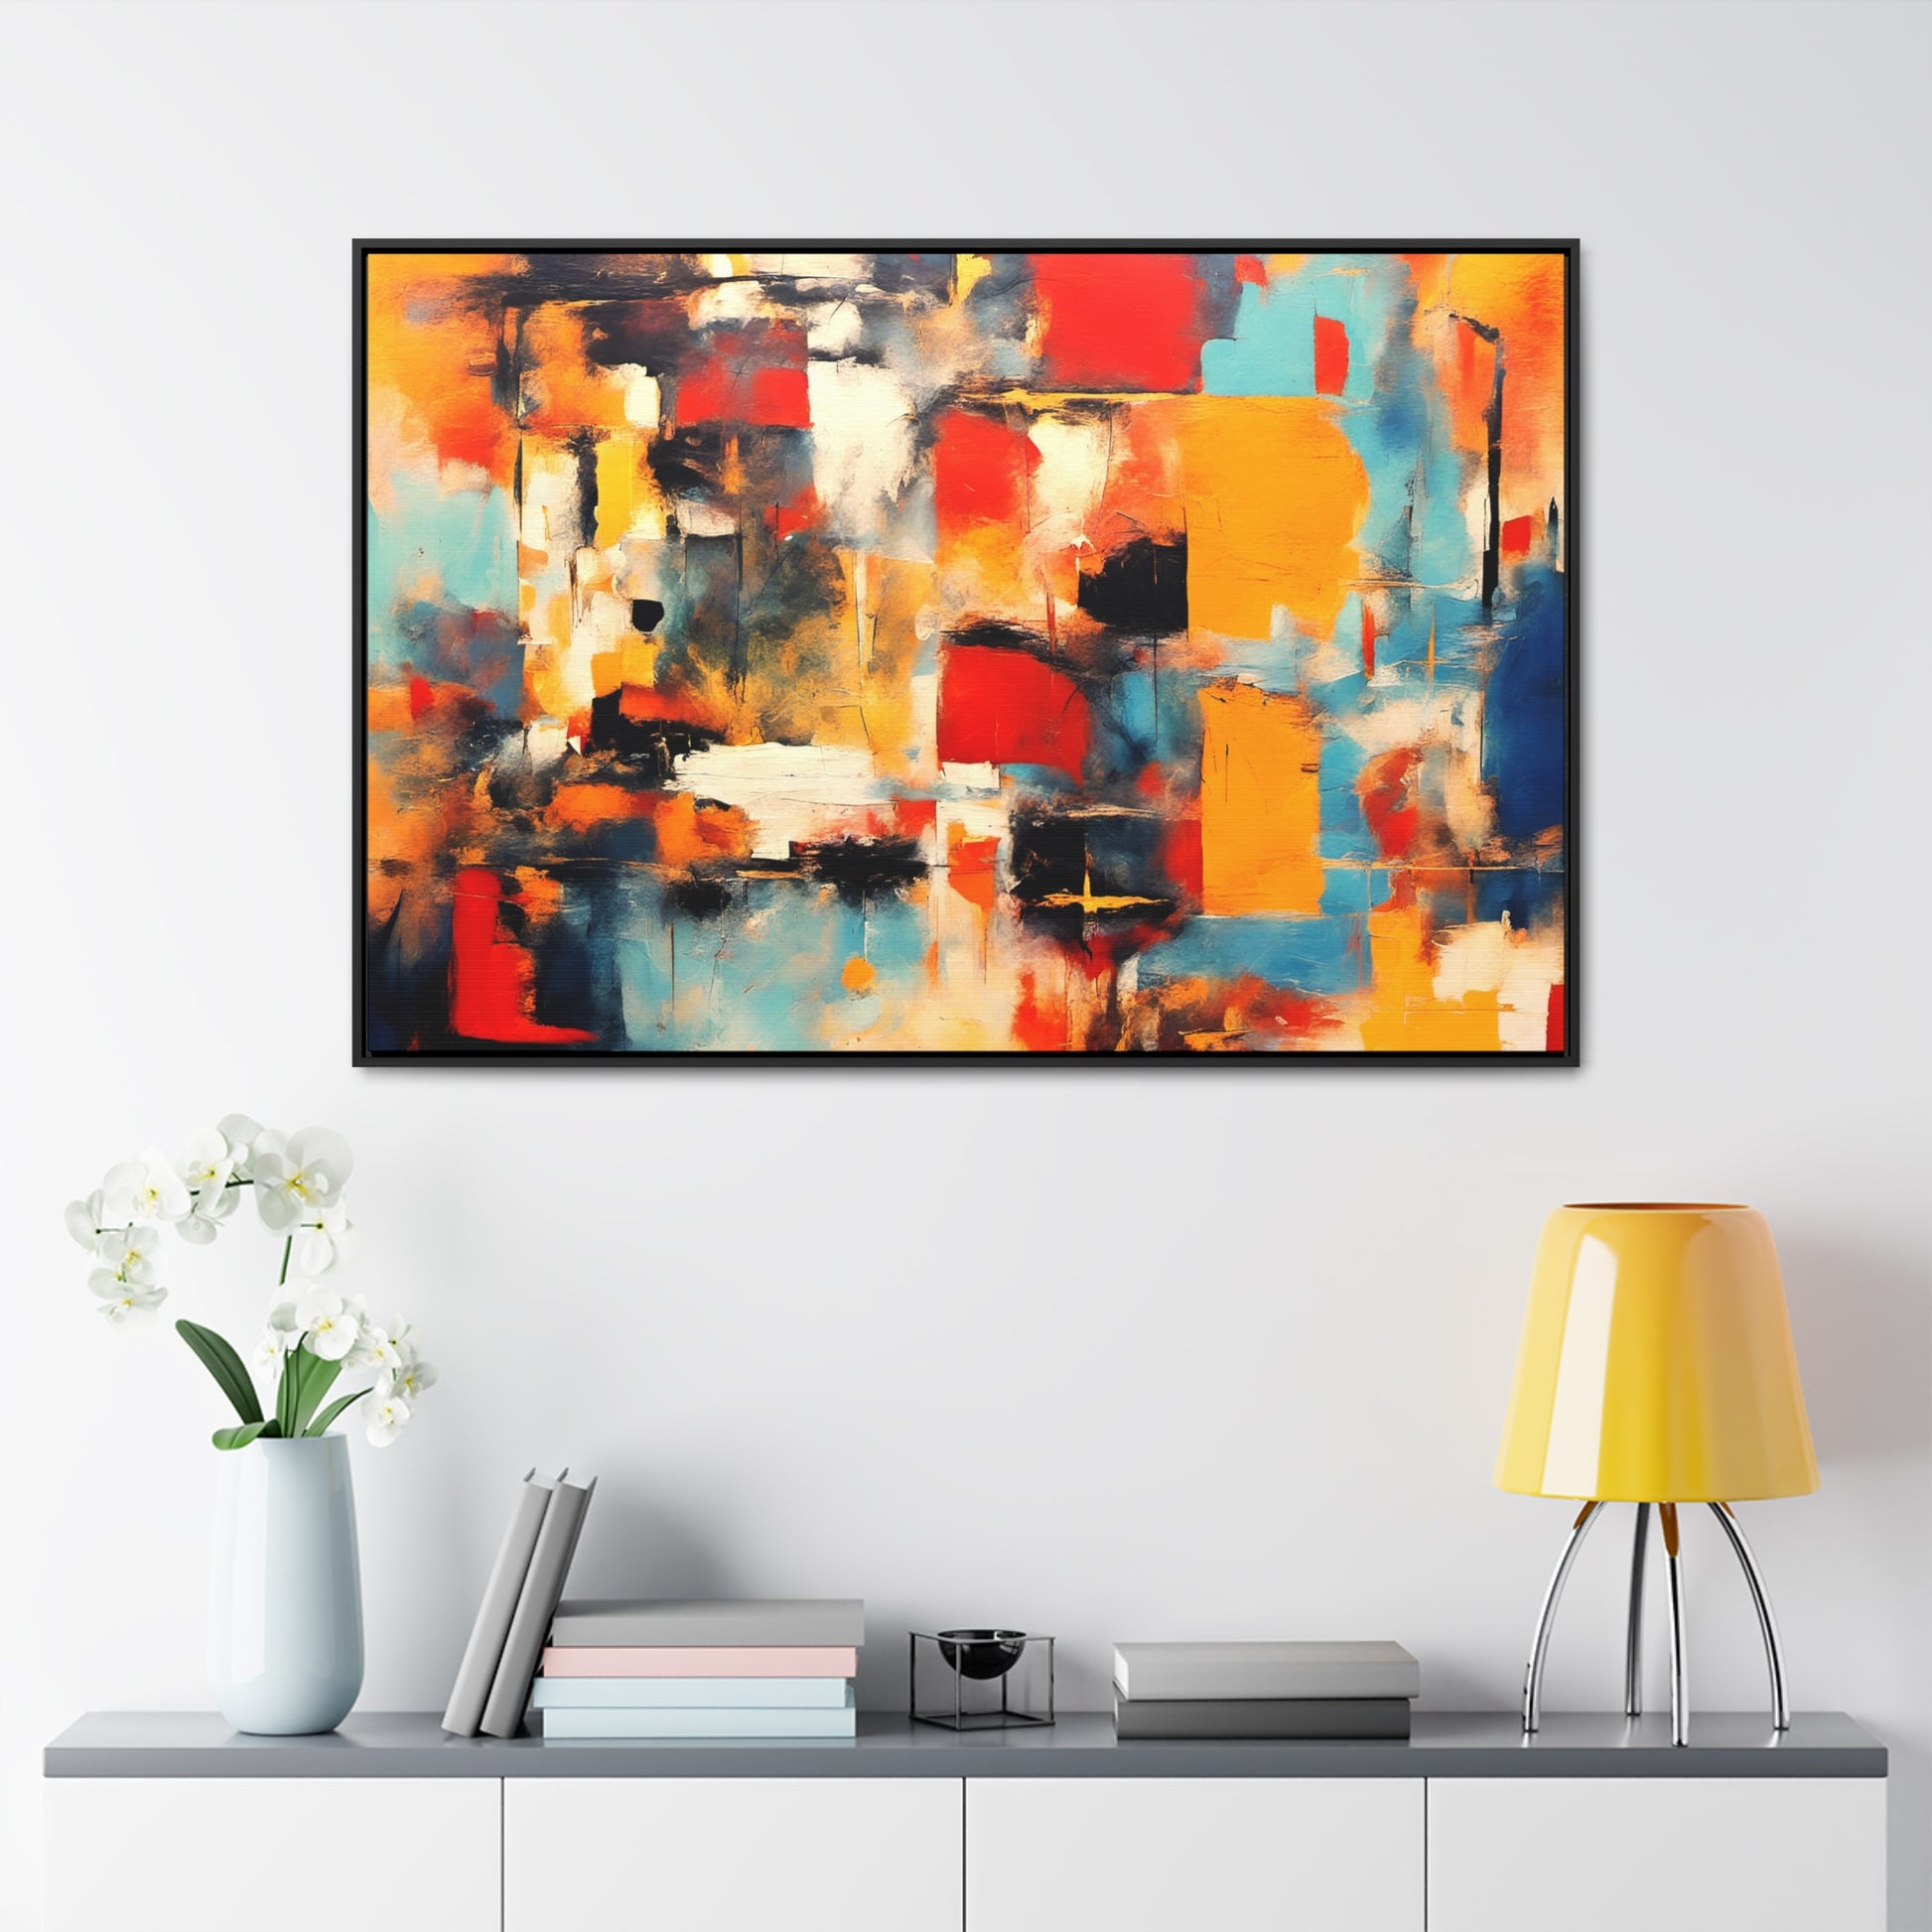 Modern Art Wall Print Reflection of Multicolor Patches in a Floating Frame 48x32